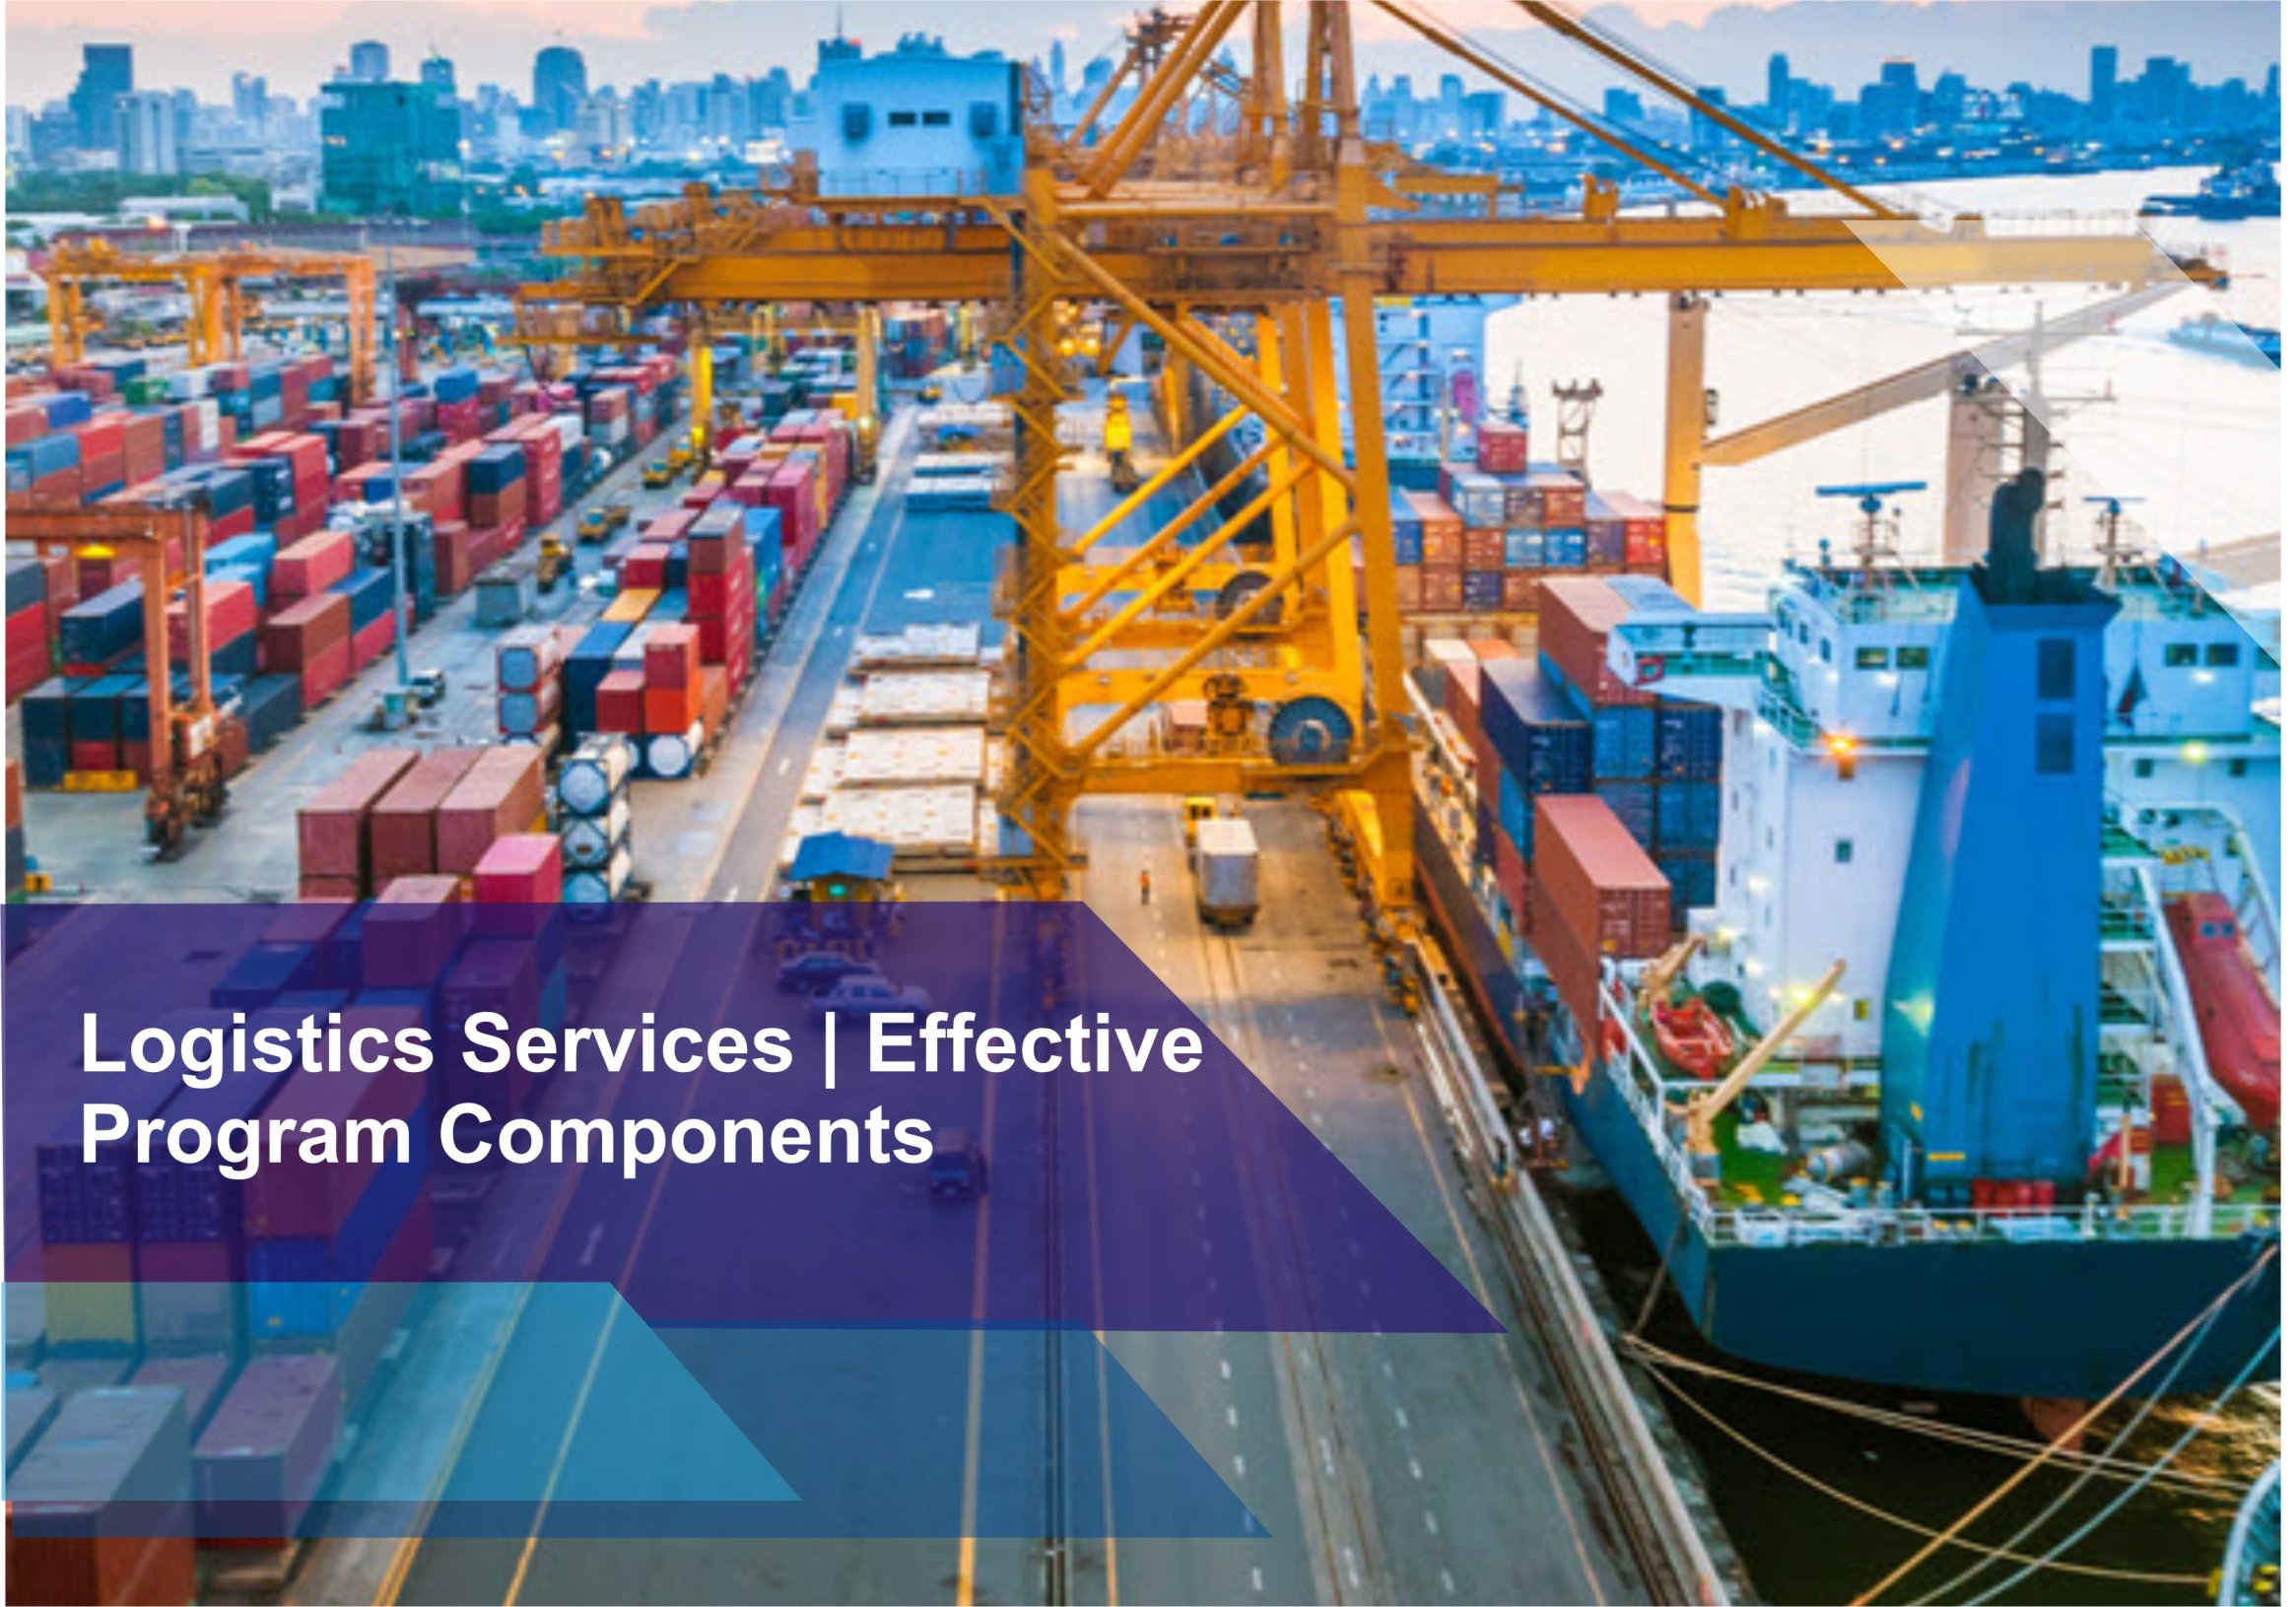 Freight Forwarder Logistics Services | Components that make the Program Effective